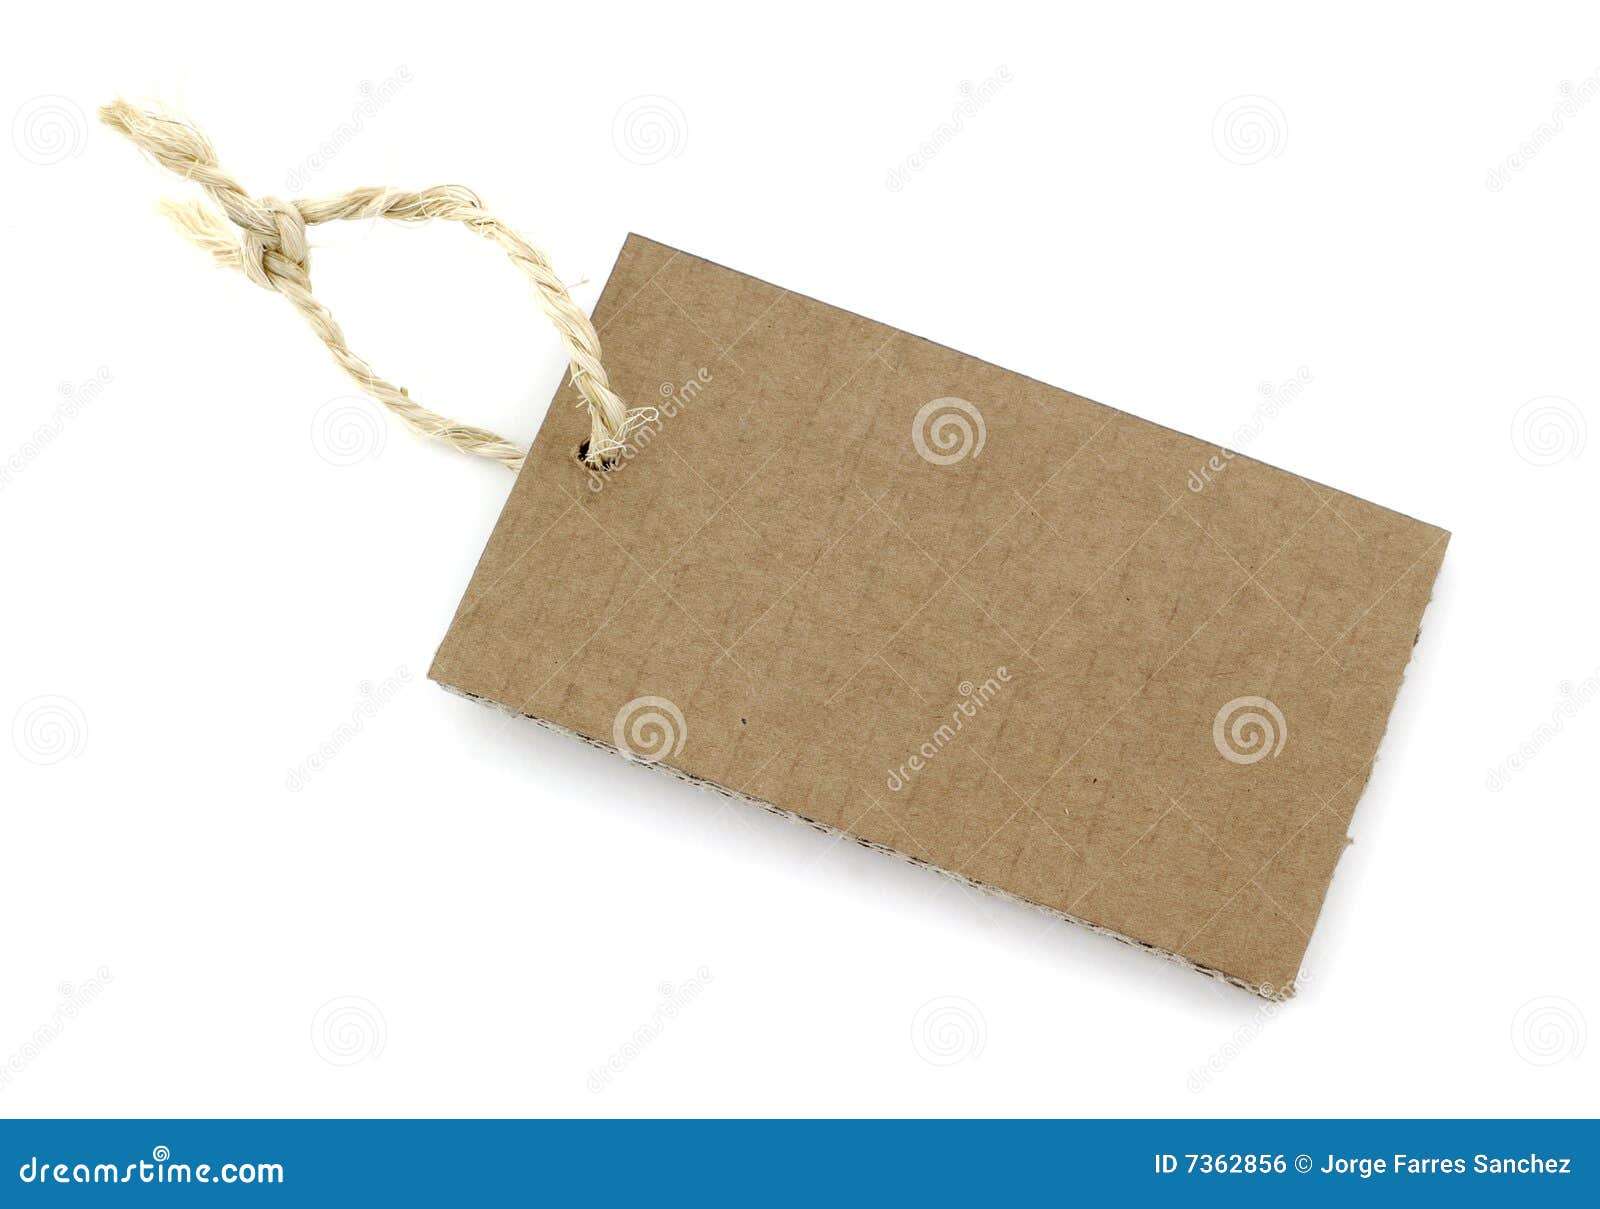 Tag board stock photo. Image of rectangle, shape, note - 7362856